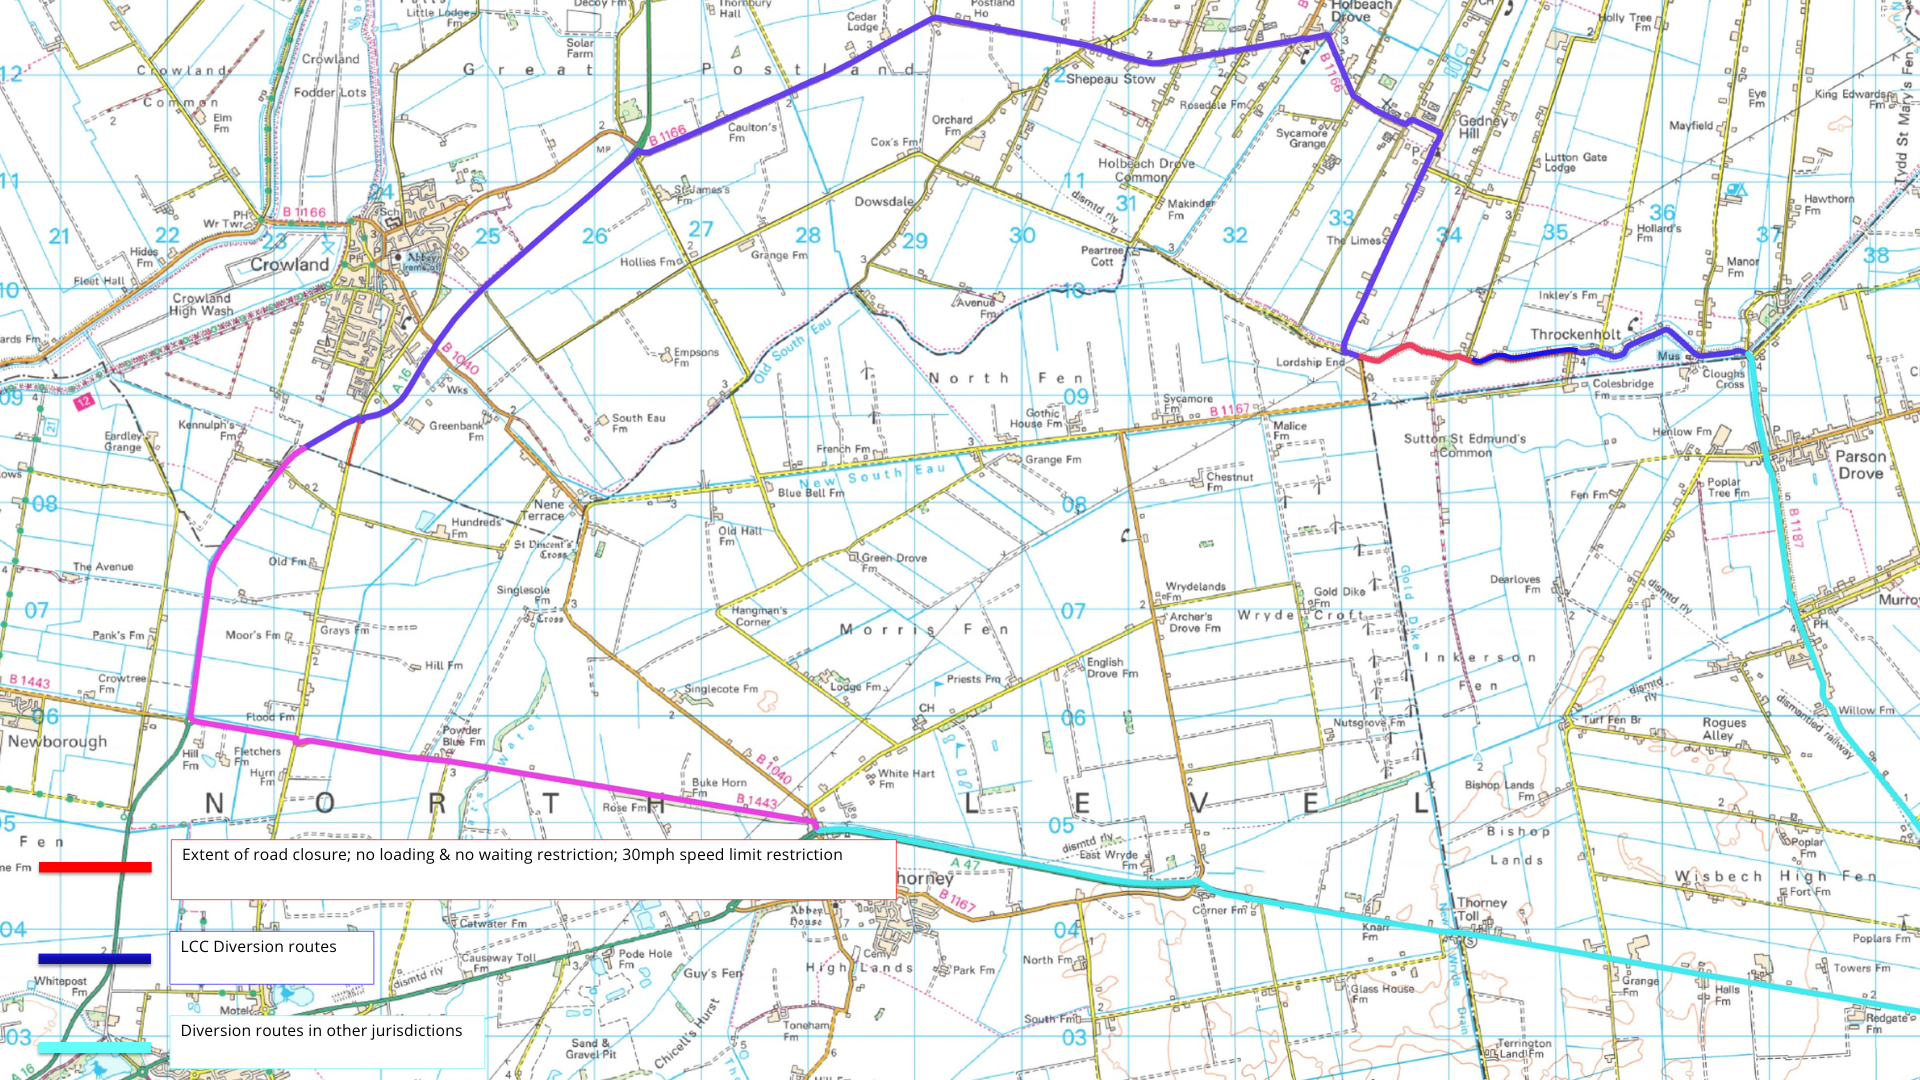 The diversion route for the South Eau Bank work